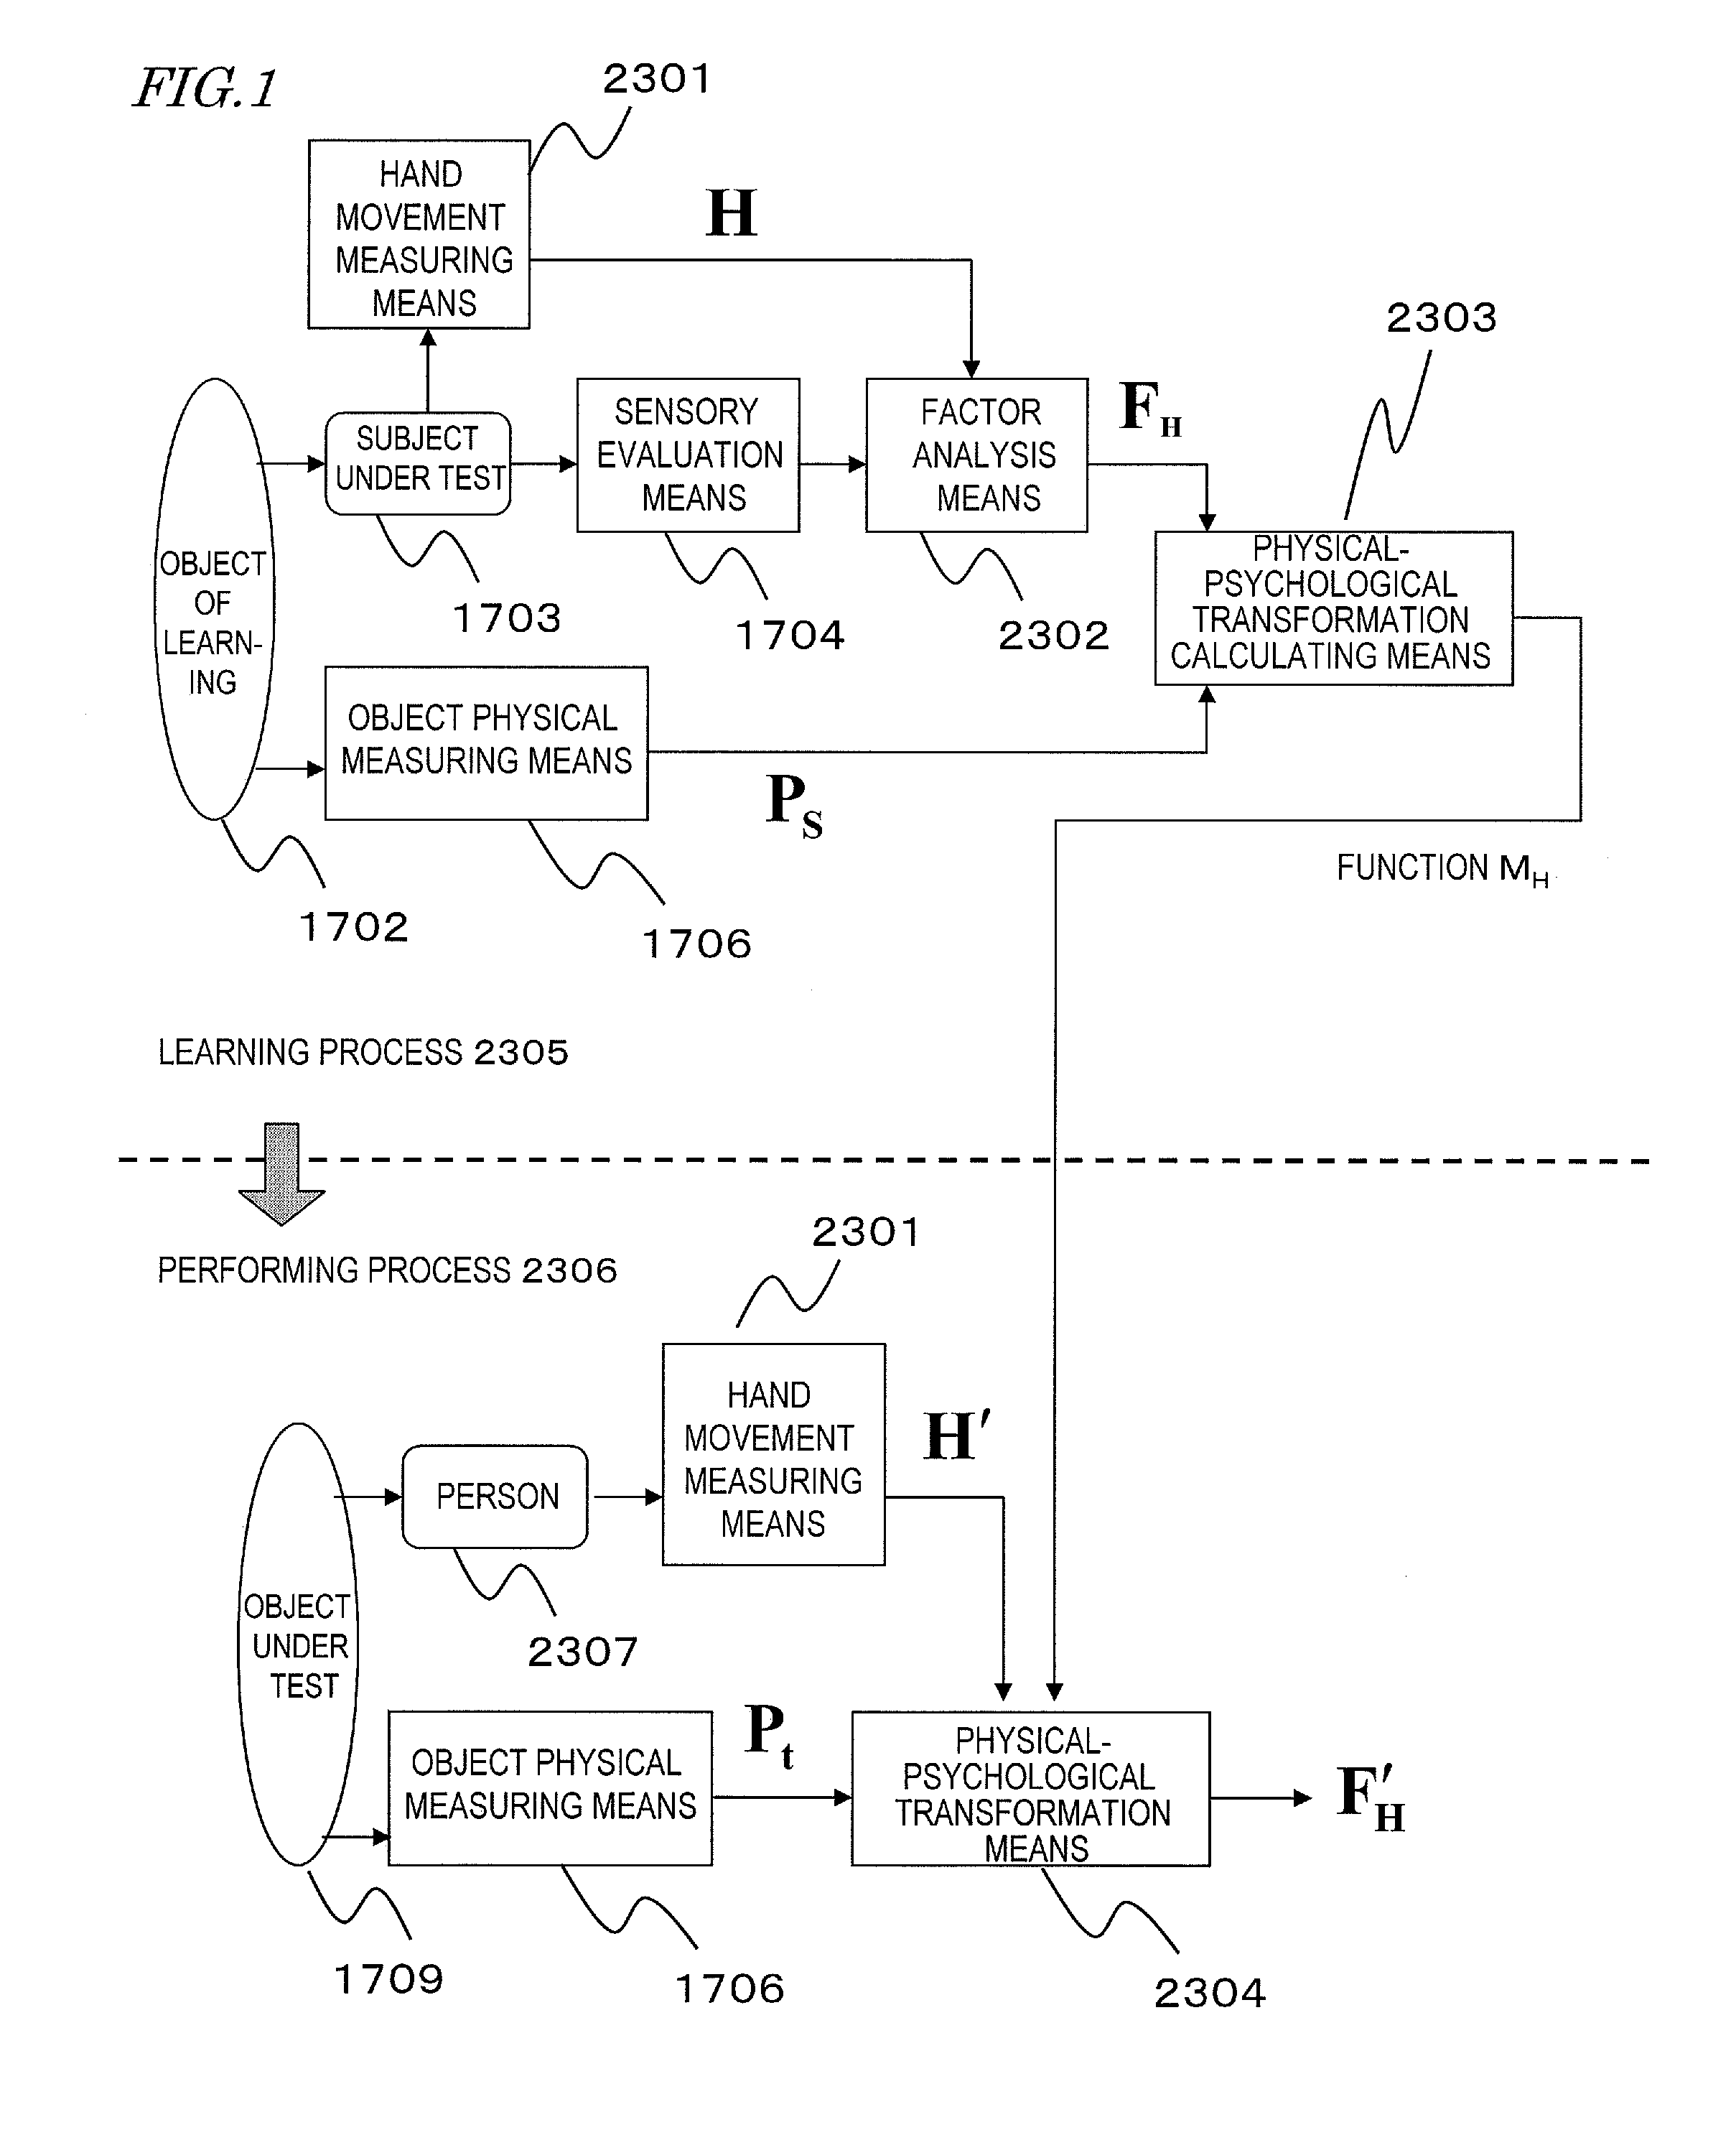 Tactile processing device